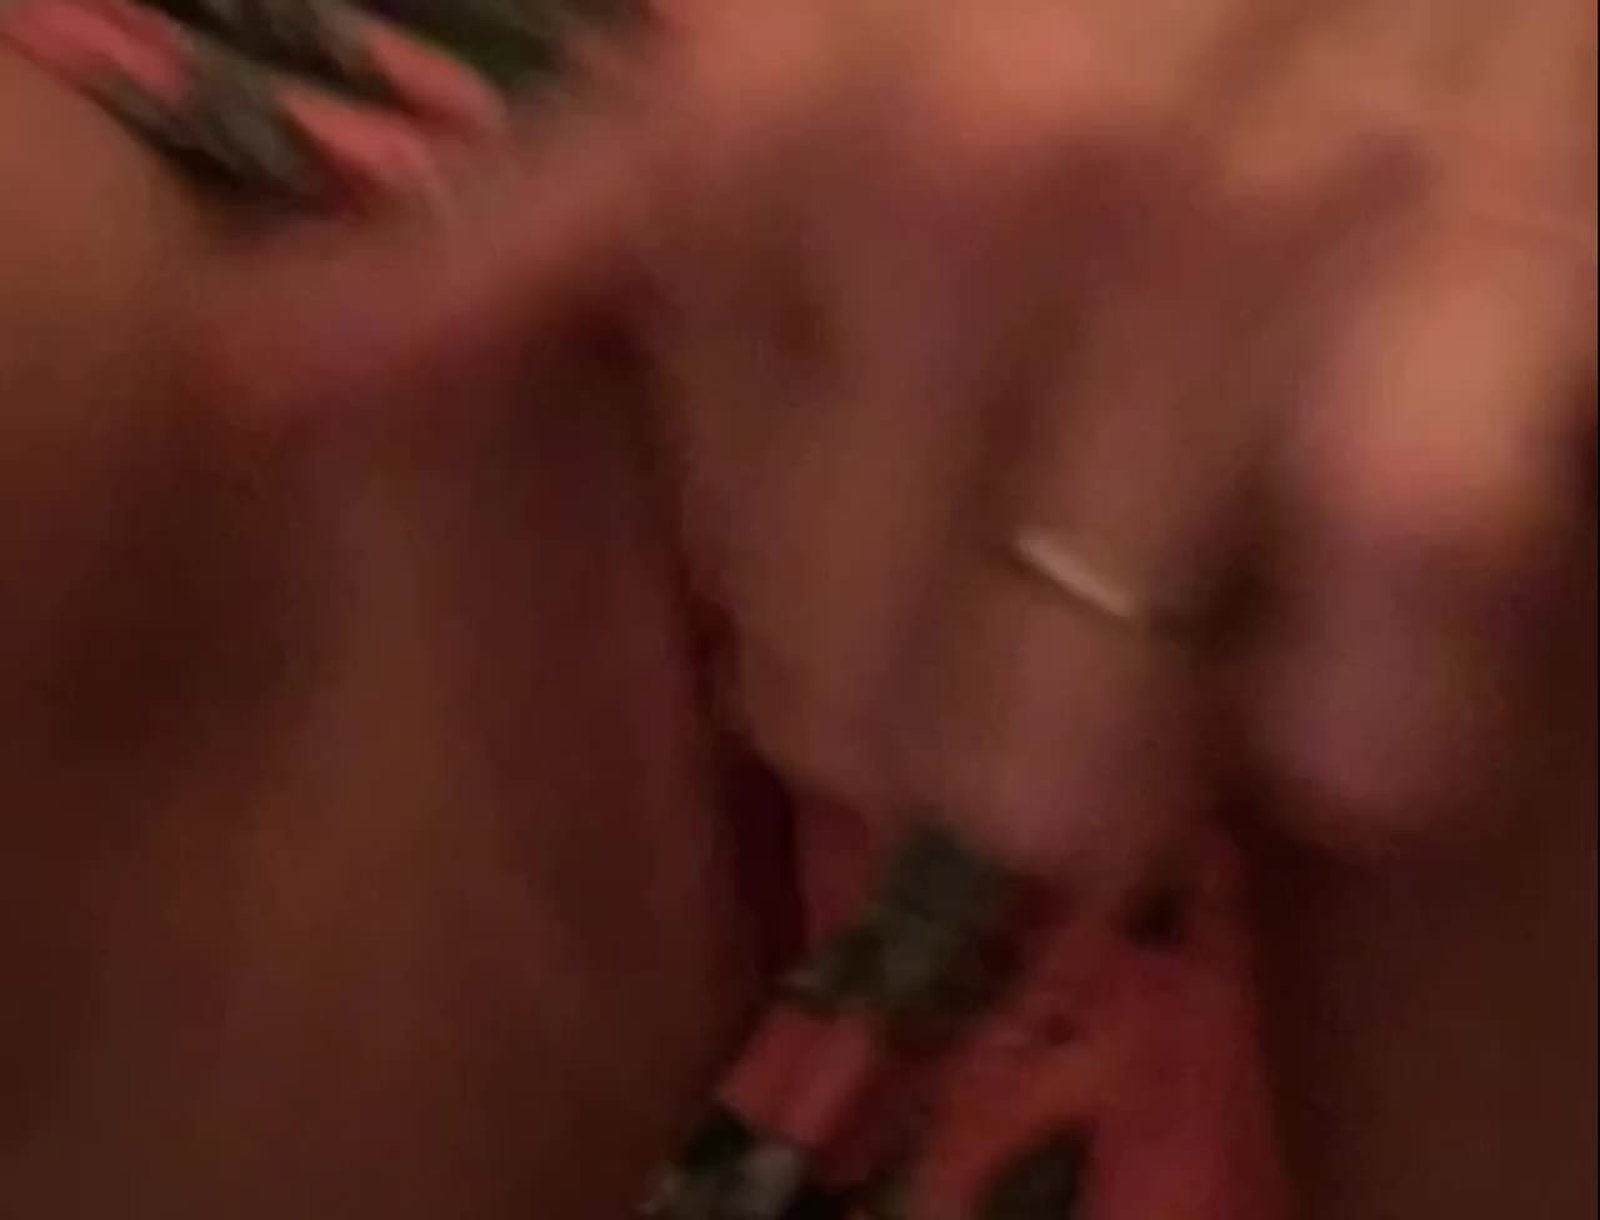 Video by Kimthemilf with the username @Kimthemilf, who is a verified user,  October 2, 2021 at 6:45 AM. The post is about the topic MILF and the text says 'Well with the roaring success of "wanky wednesday" i decided to go for "Fuckhole Friday" but once again im late to the party so maybe this is is more "spread my tight cunt hole like the naughty cock hungry slut i am saturday"'